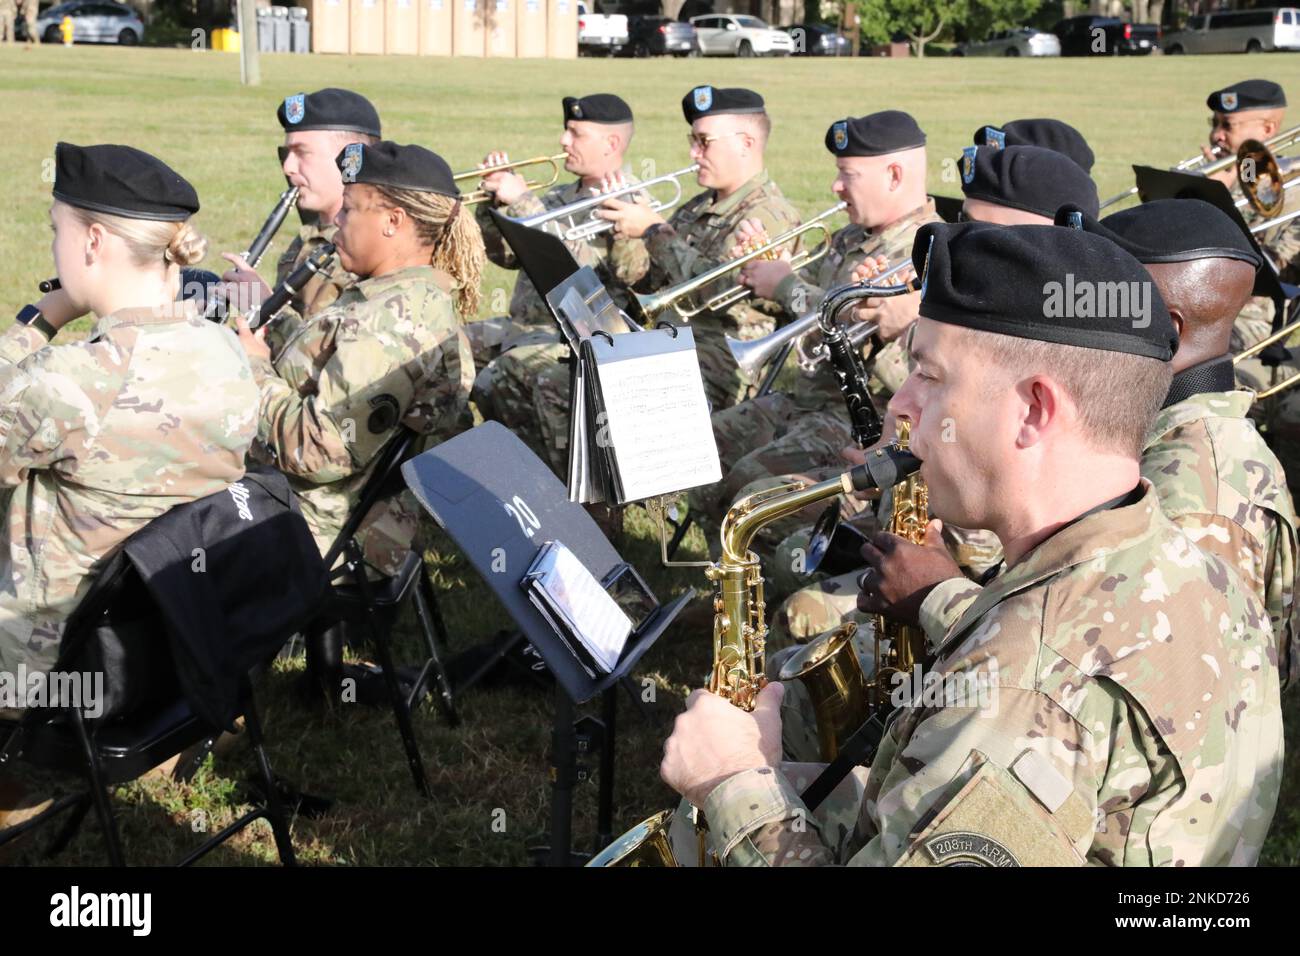 The 208th Army Band provided music and ceremonial cues to the festivities at the U.S. Army Civil Affairs and Psychological Operations Command (AIRBORNE) joint Change of Command, Change of Responsibility, Retirement Ceremony held at Ft. Bragg, NC., August 13, 2022. Stock Photo